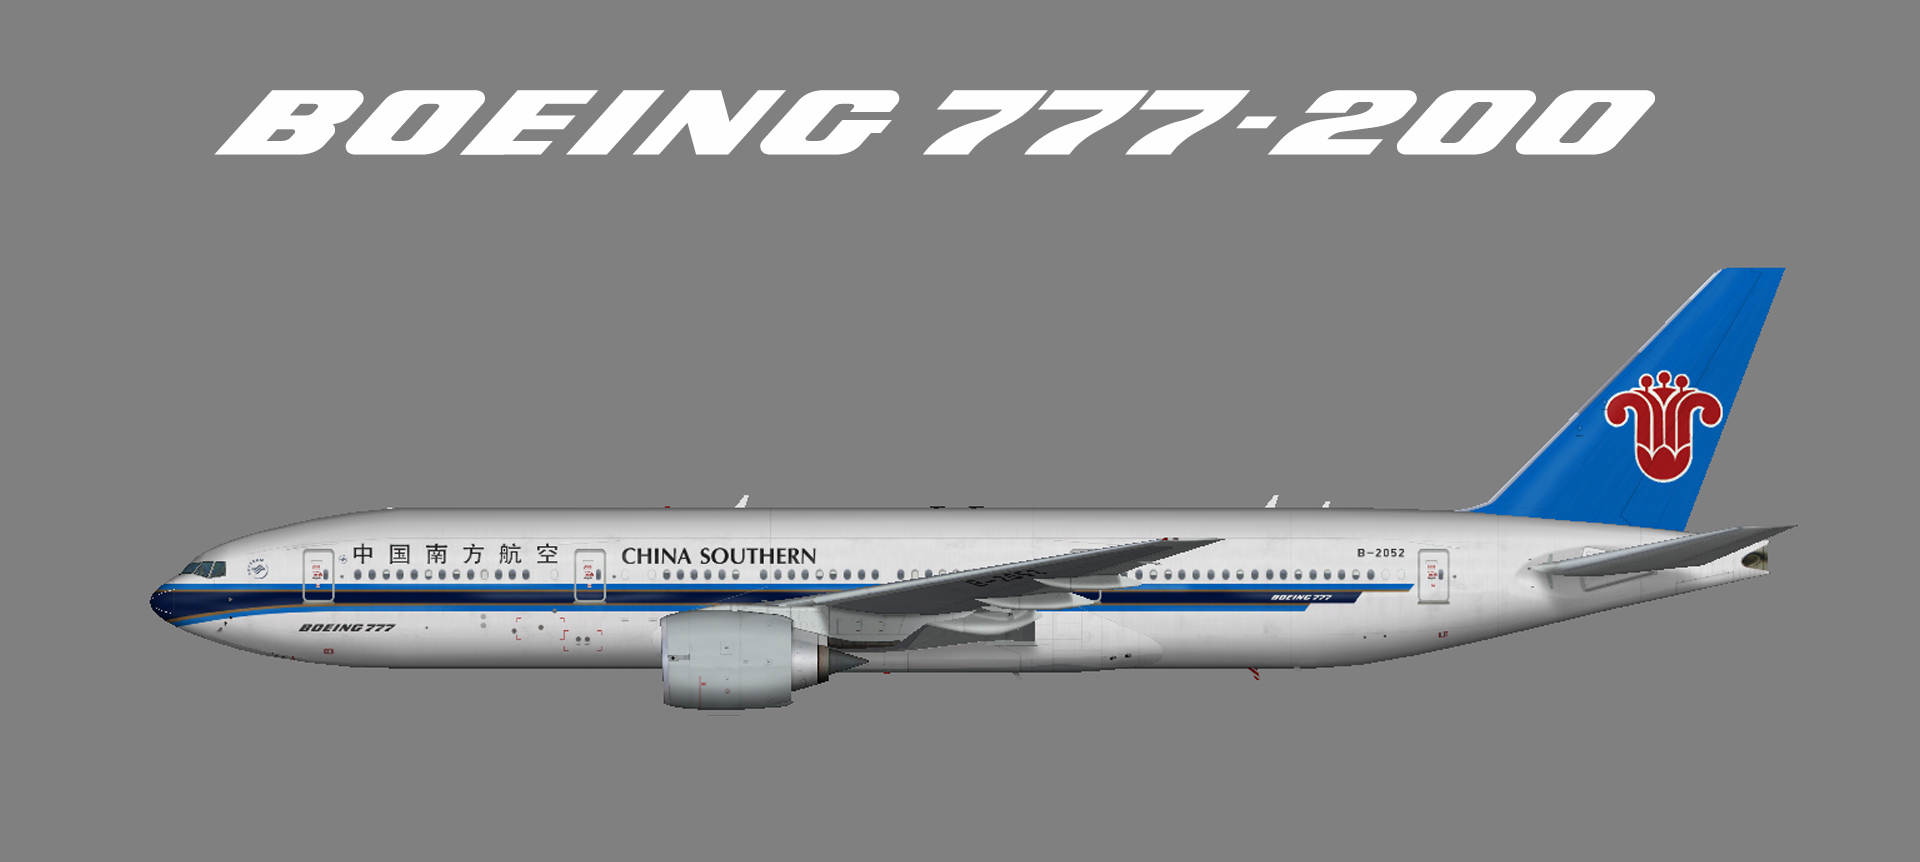 China Southern Boeing 777-200 (FSP)